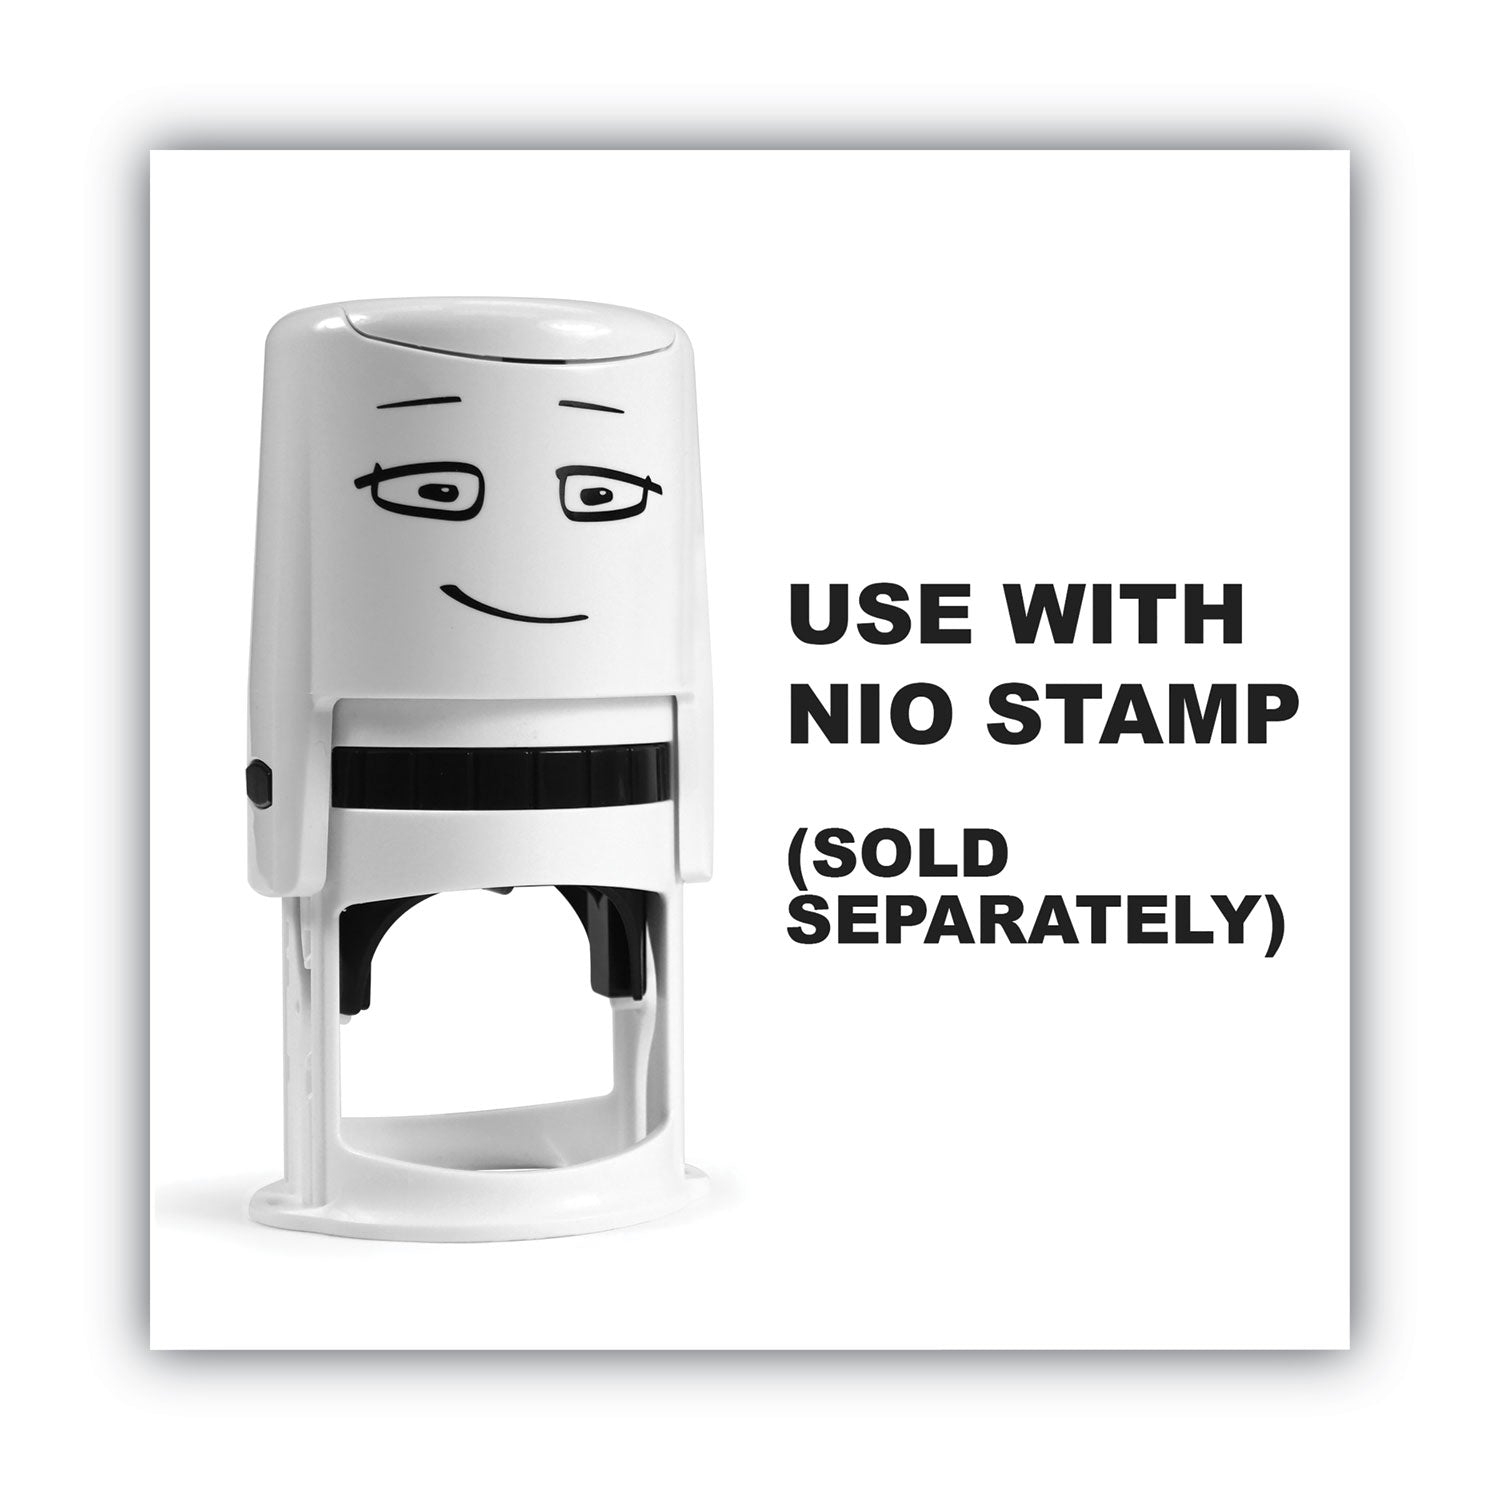 ink-pad-for-nio-stamp-with-voucher-275-x-275-fancy-gray_cos071519 - 4